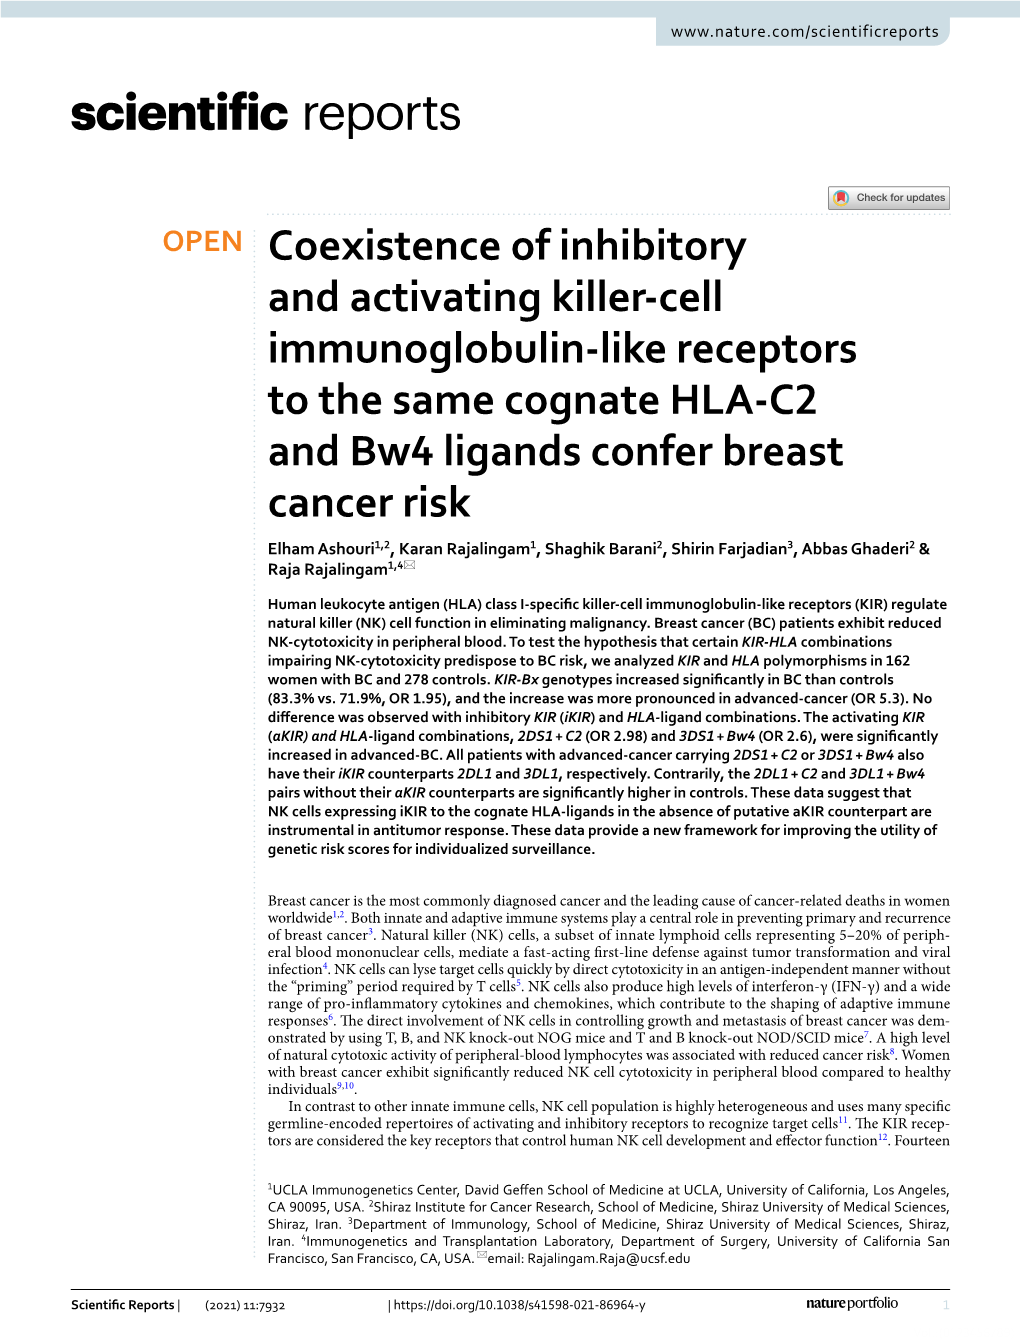 Coexistence of Inhibitory and Activating Killer-Cell Immunoglobulin